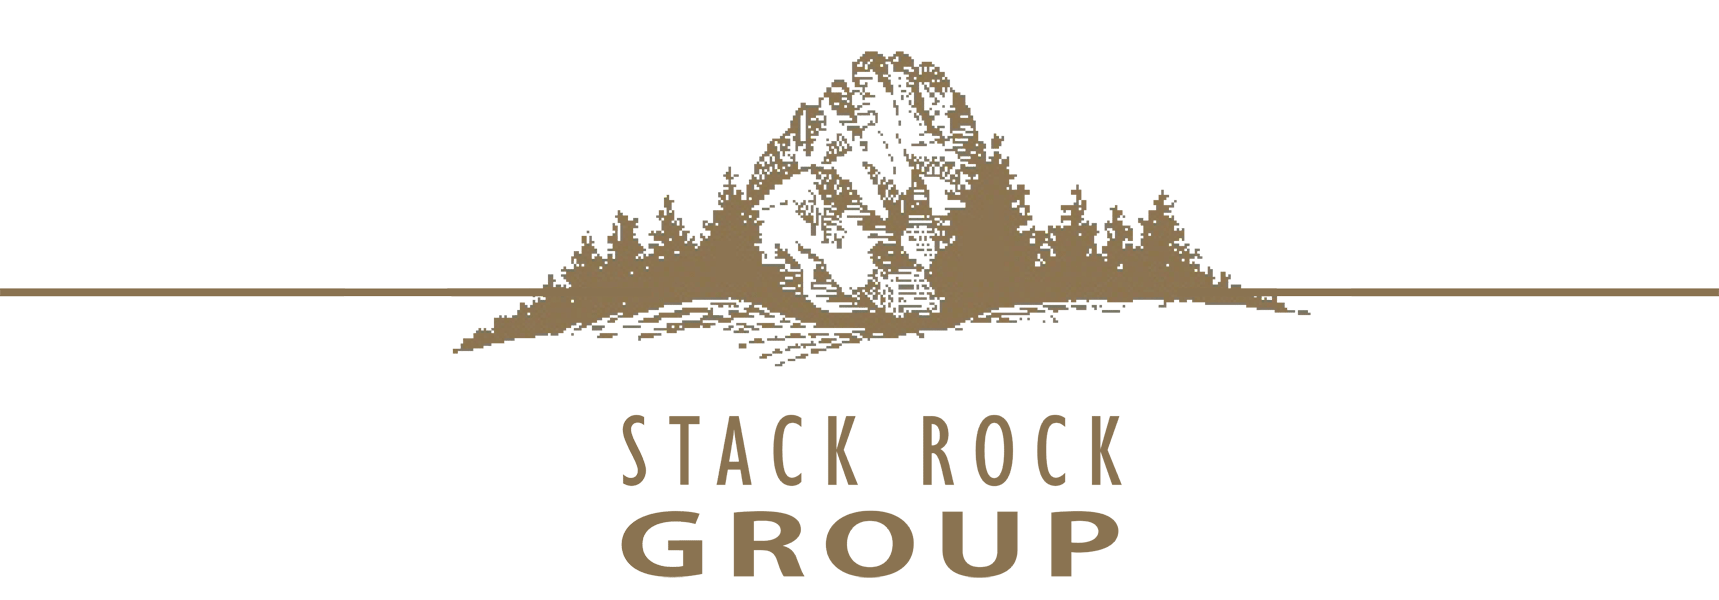 Rock Group Logo - Stack Rock Group - Landscape Architecture and Planning - Boise ...